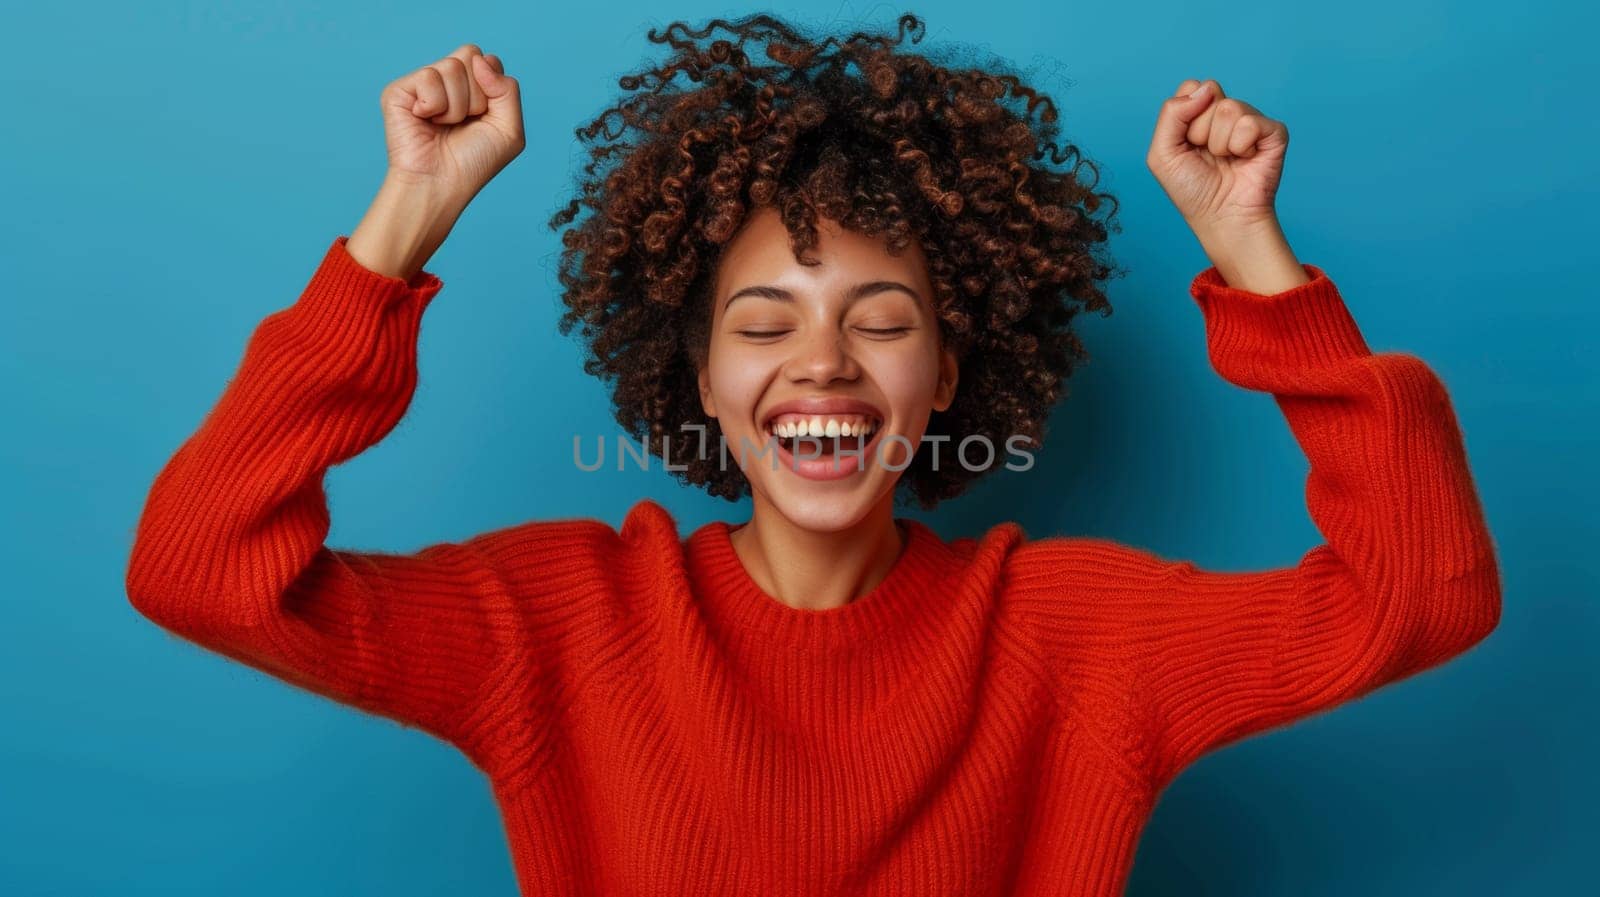 A woman in a red sweater celebrating with her hands up, AI by starush